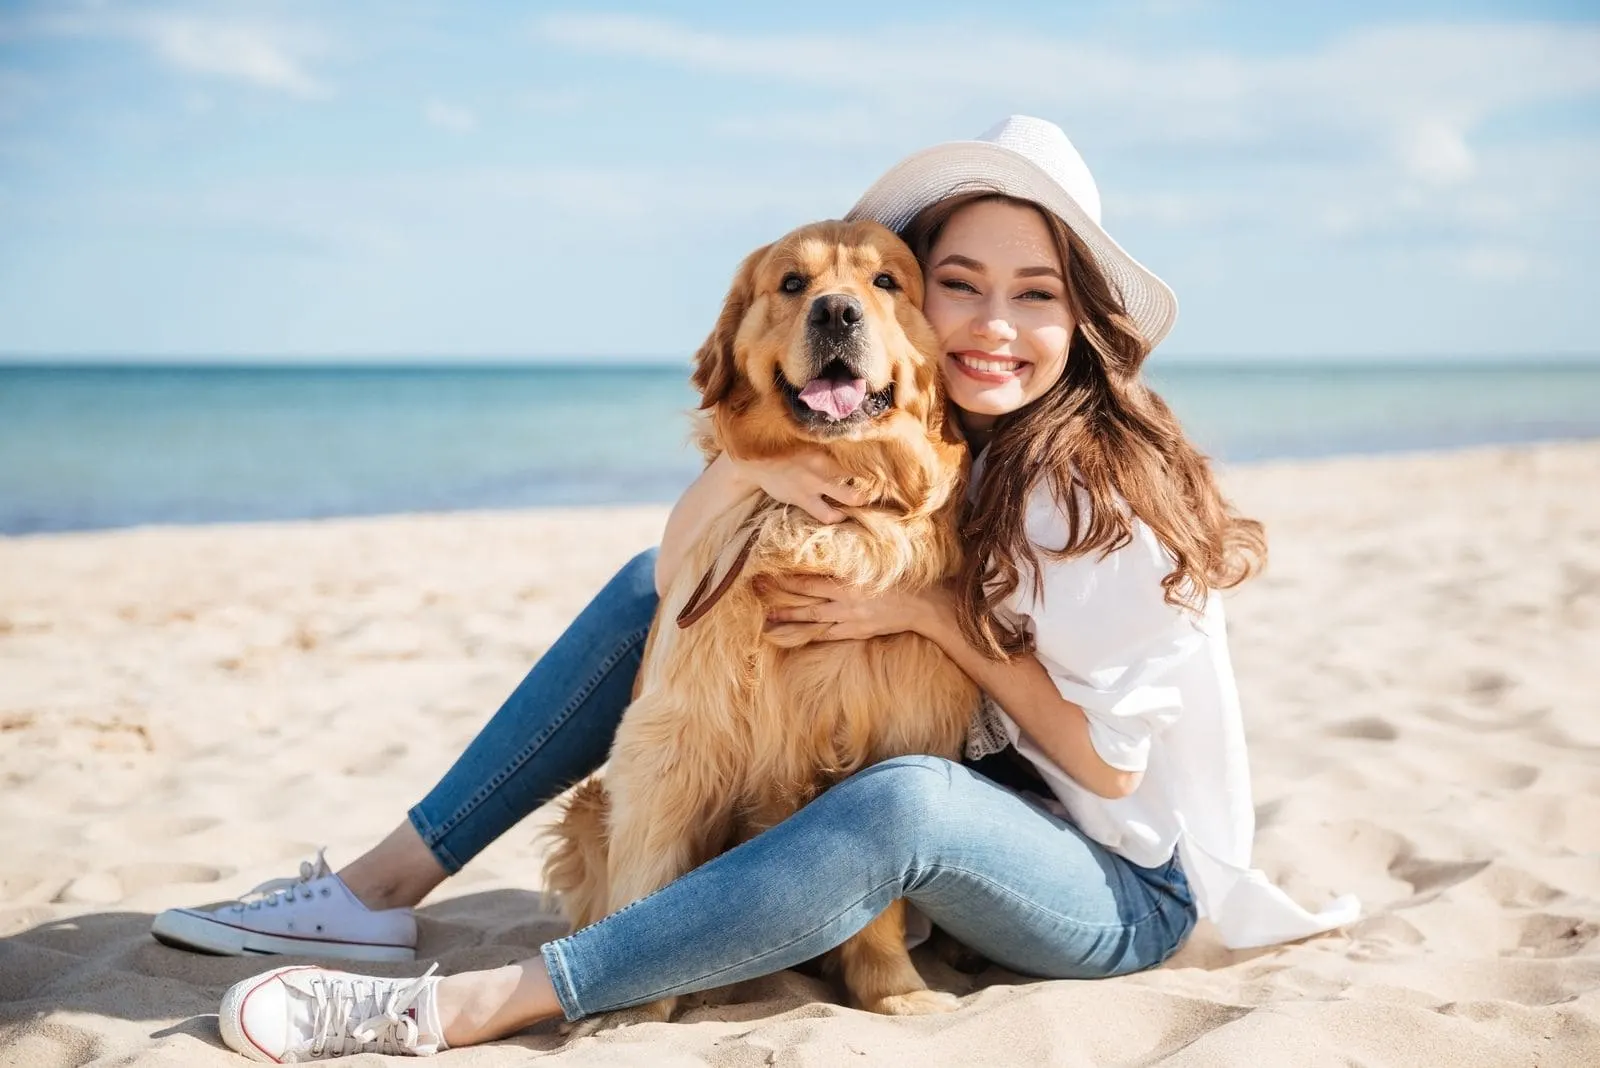 cheerful young woman sitting and embracing a dog in the beach during the day